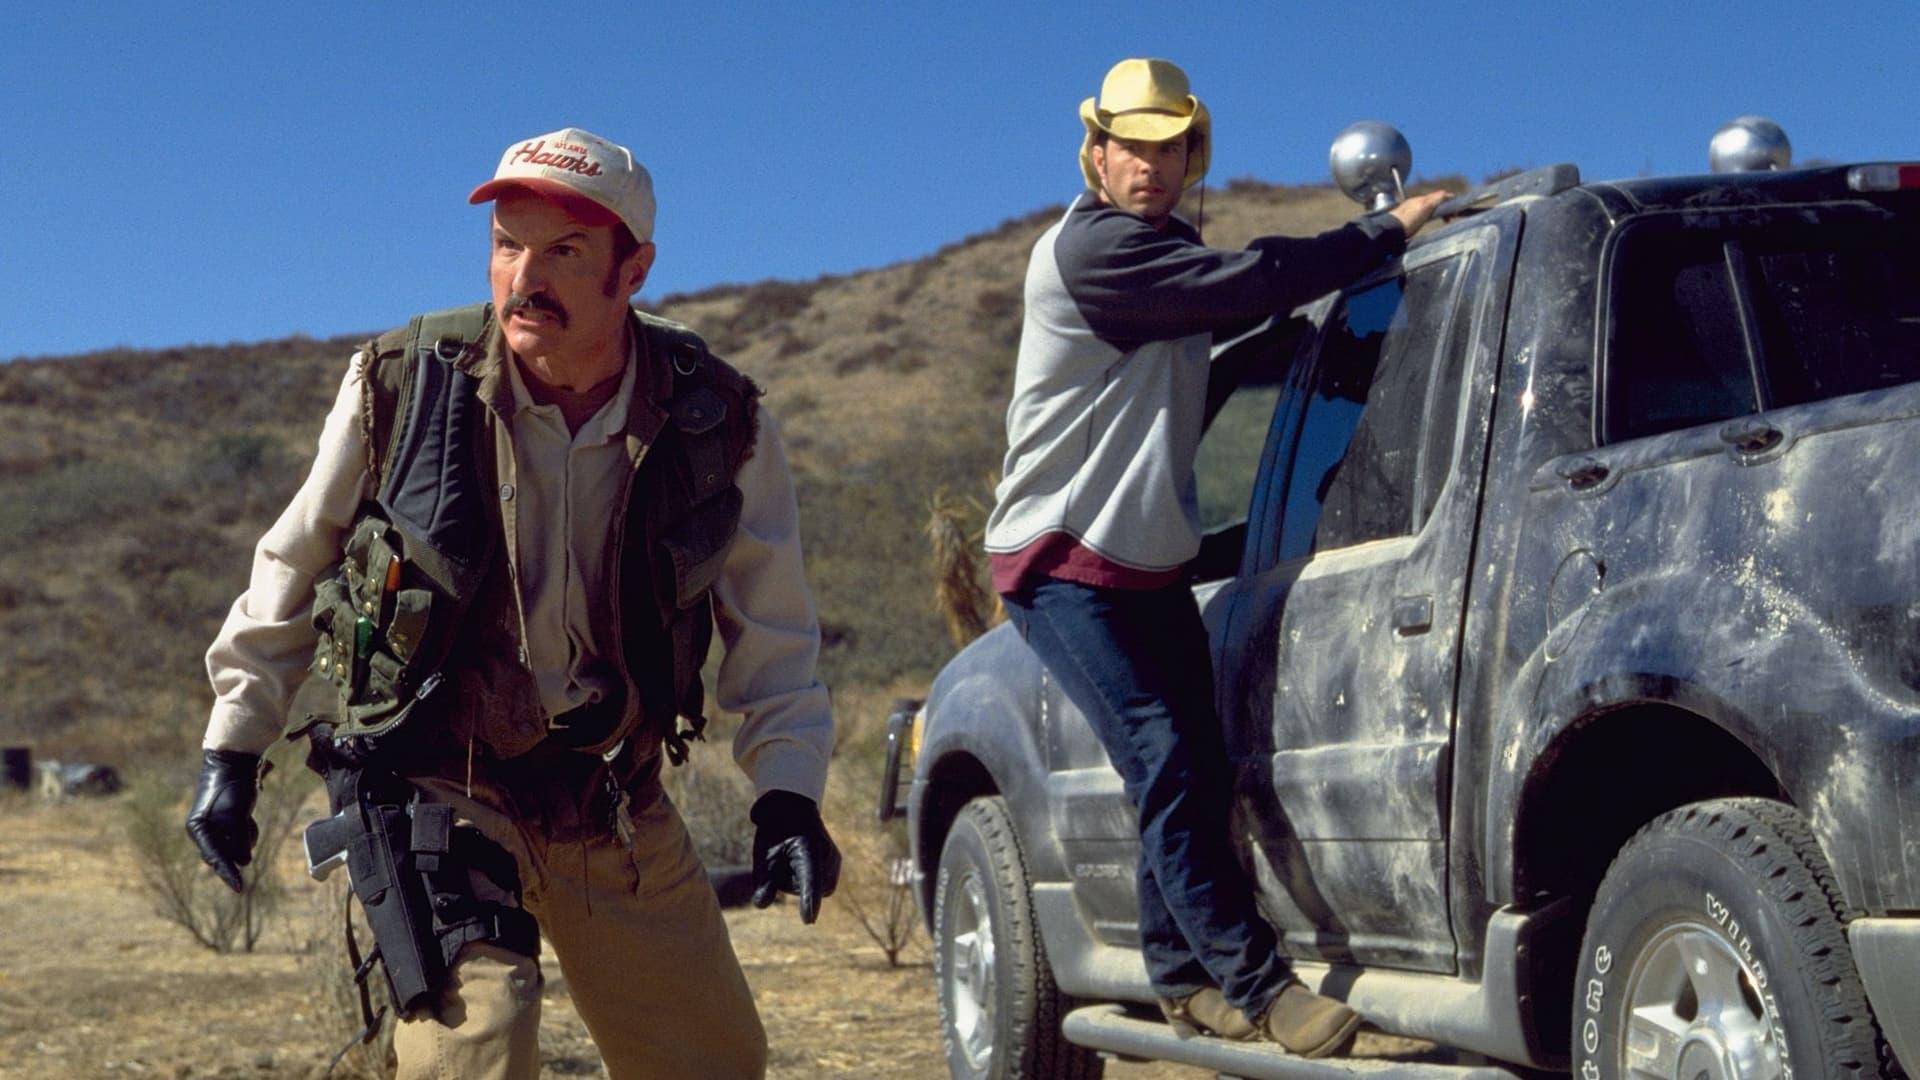 Tremors 3: Back to Perfection backdrop